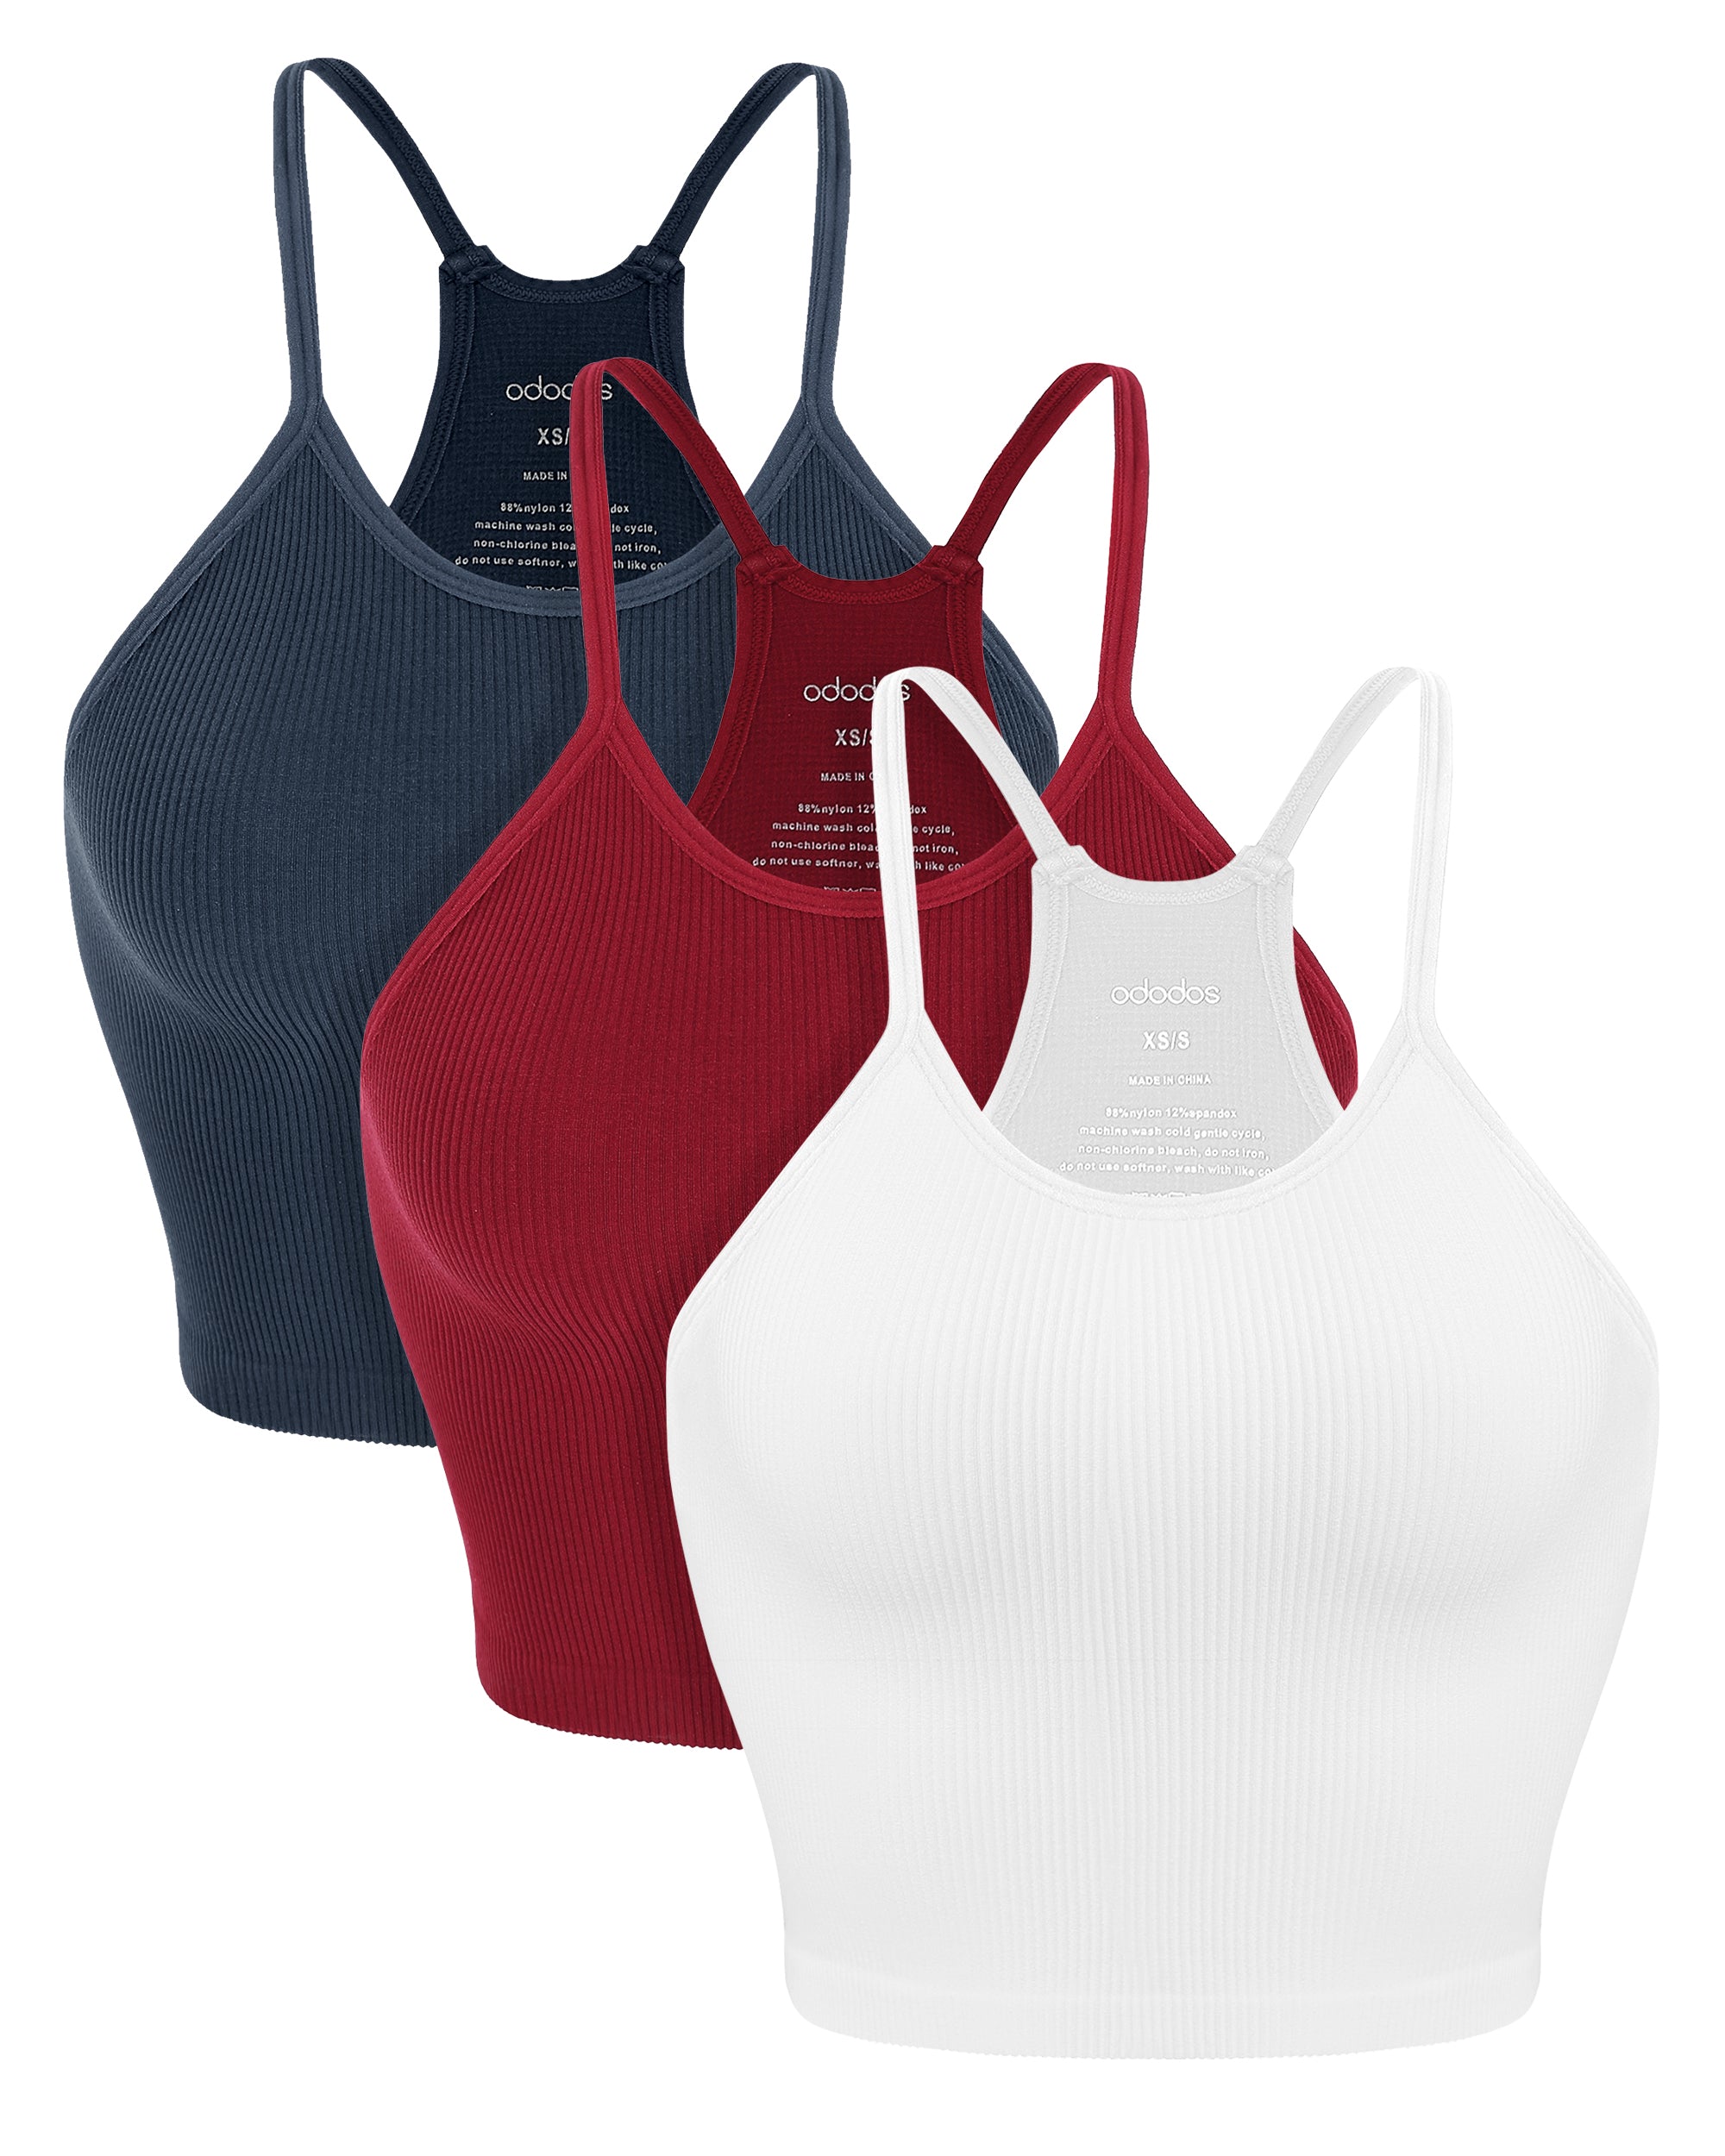 ODODOS Womens Crop 3-Pack Washed Seamless Rib-Knit Camisole Crop Tank Tops